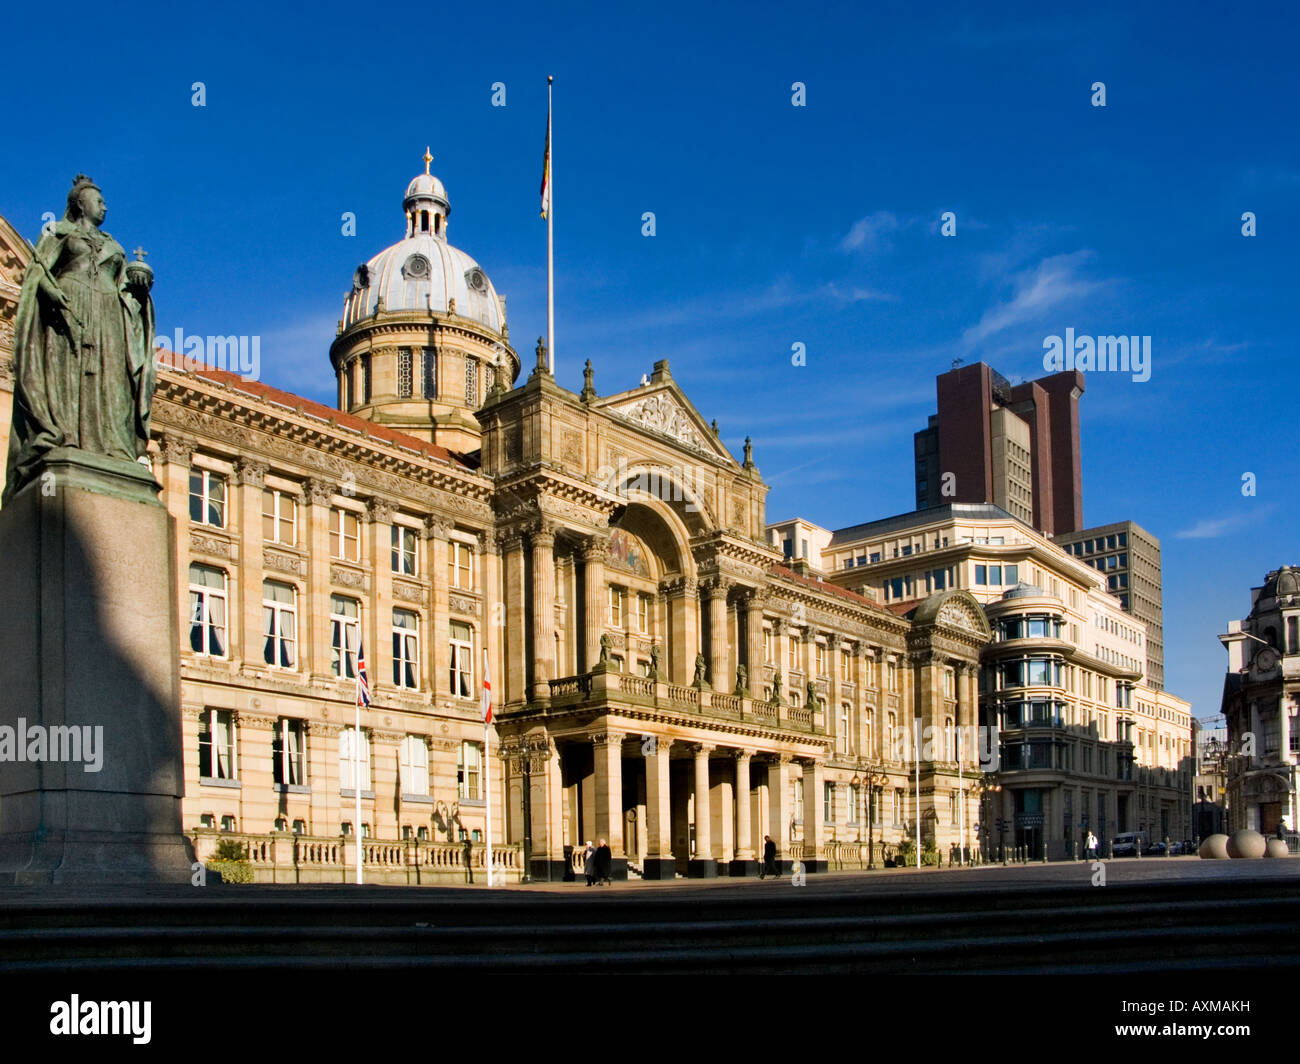 Birmingham City Hall and statue of Queen Victoria in the winter morning sunshine, West Midlands, England, UK Stock Photo